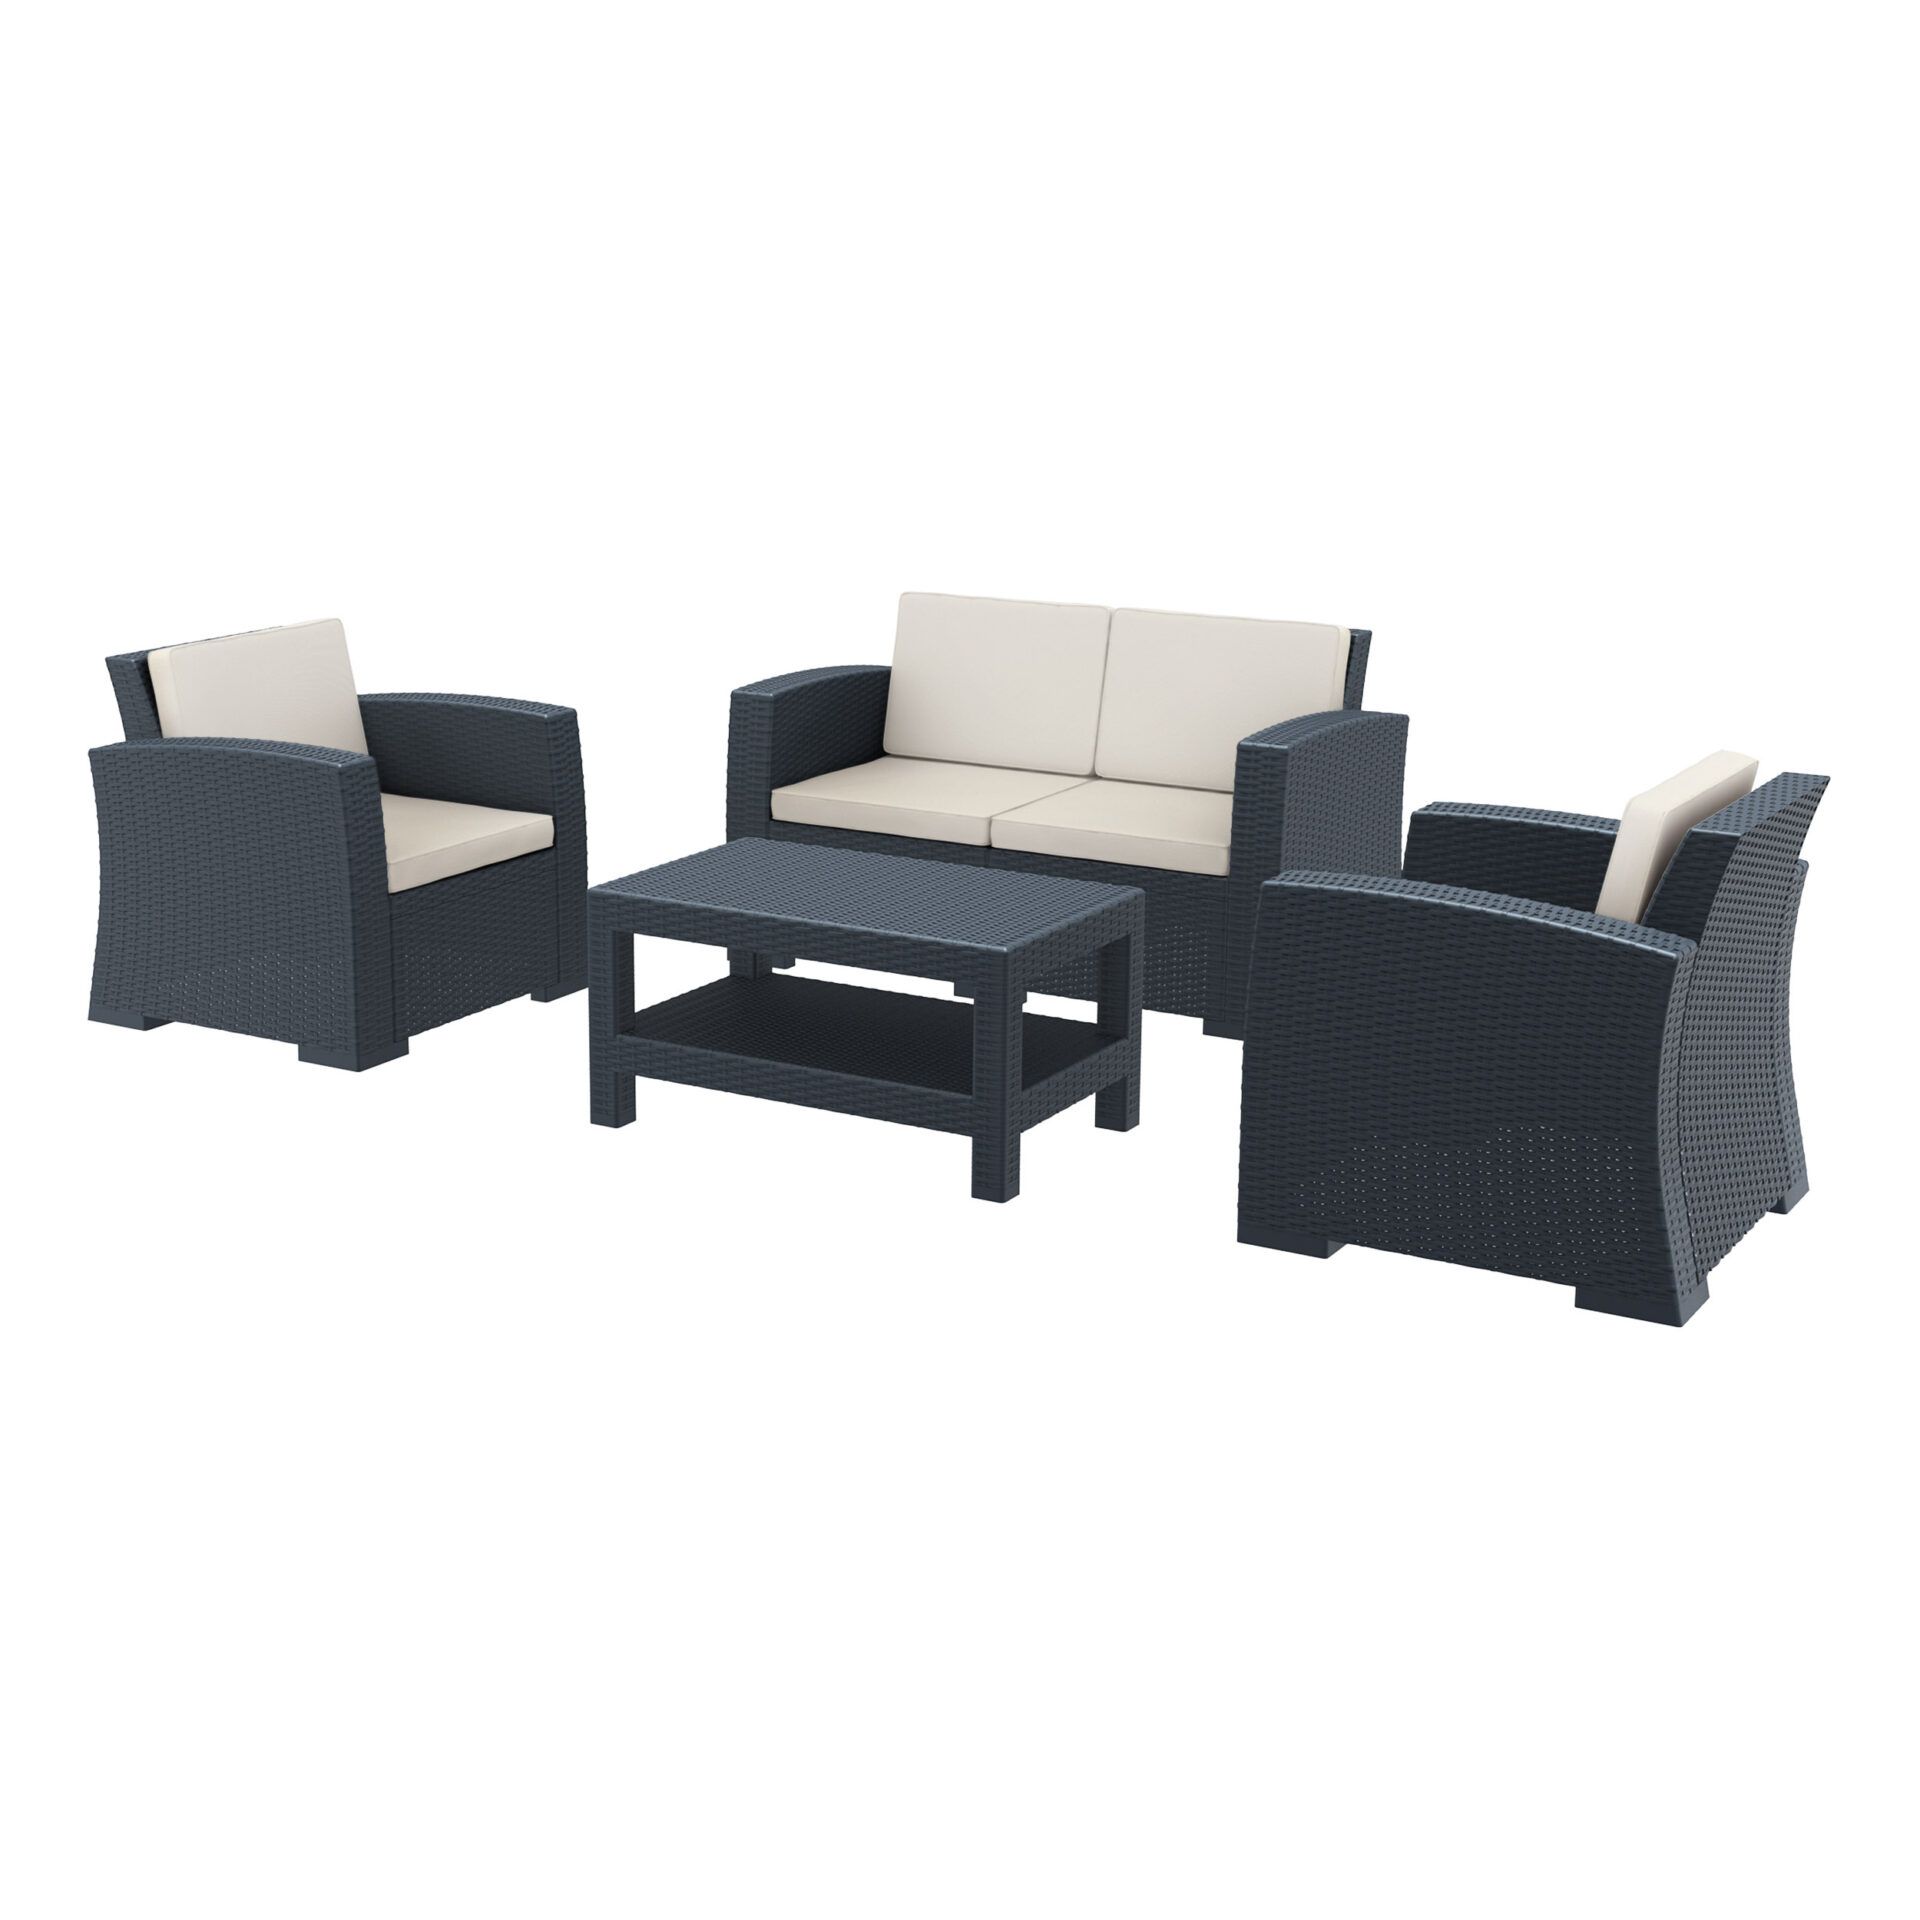 Monaco Lounge Set - Anthracite with cushions